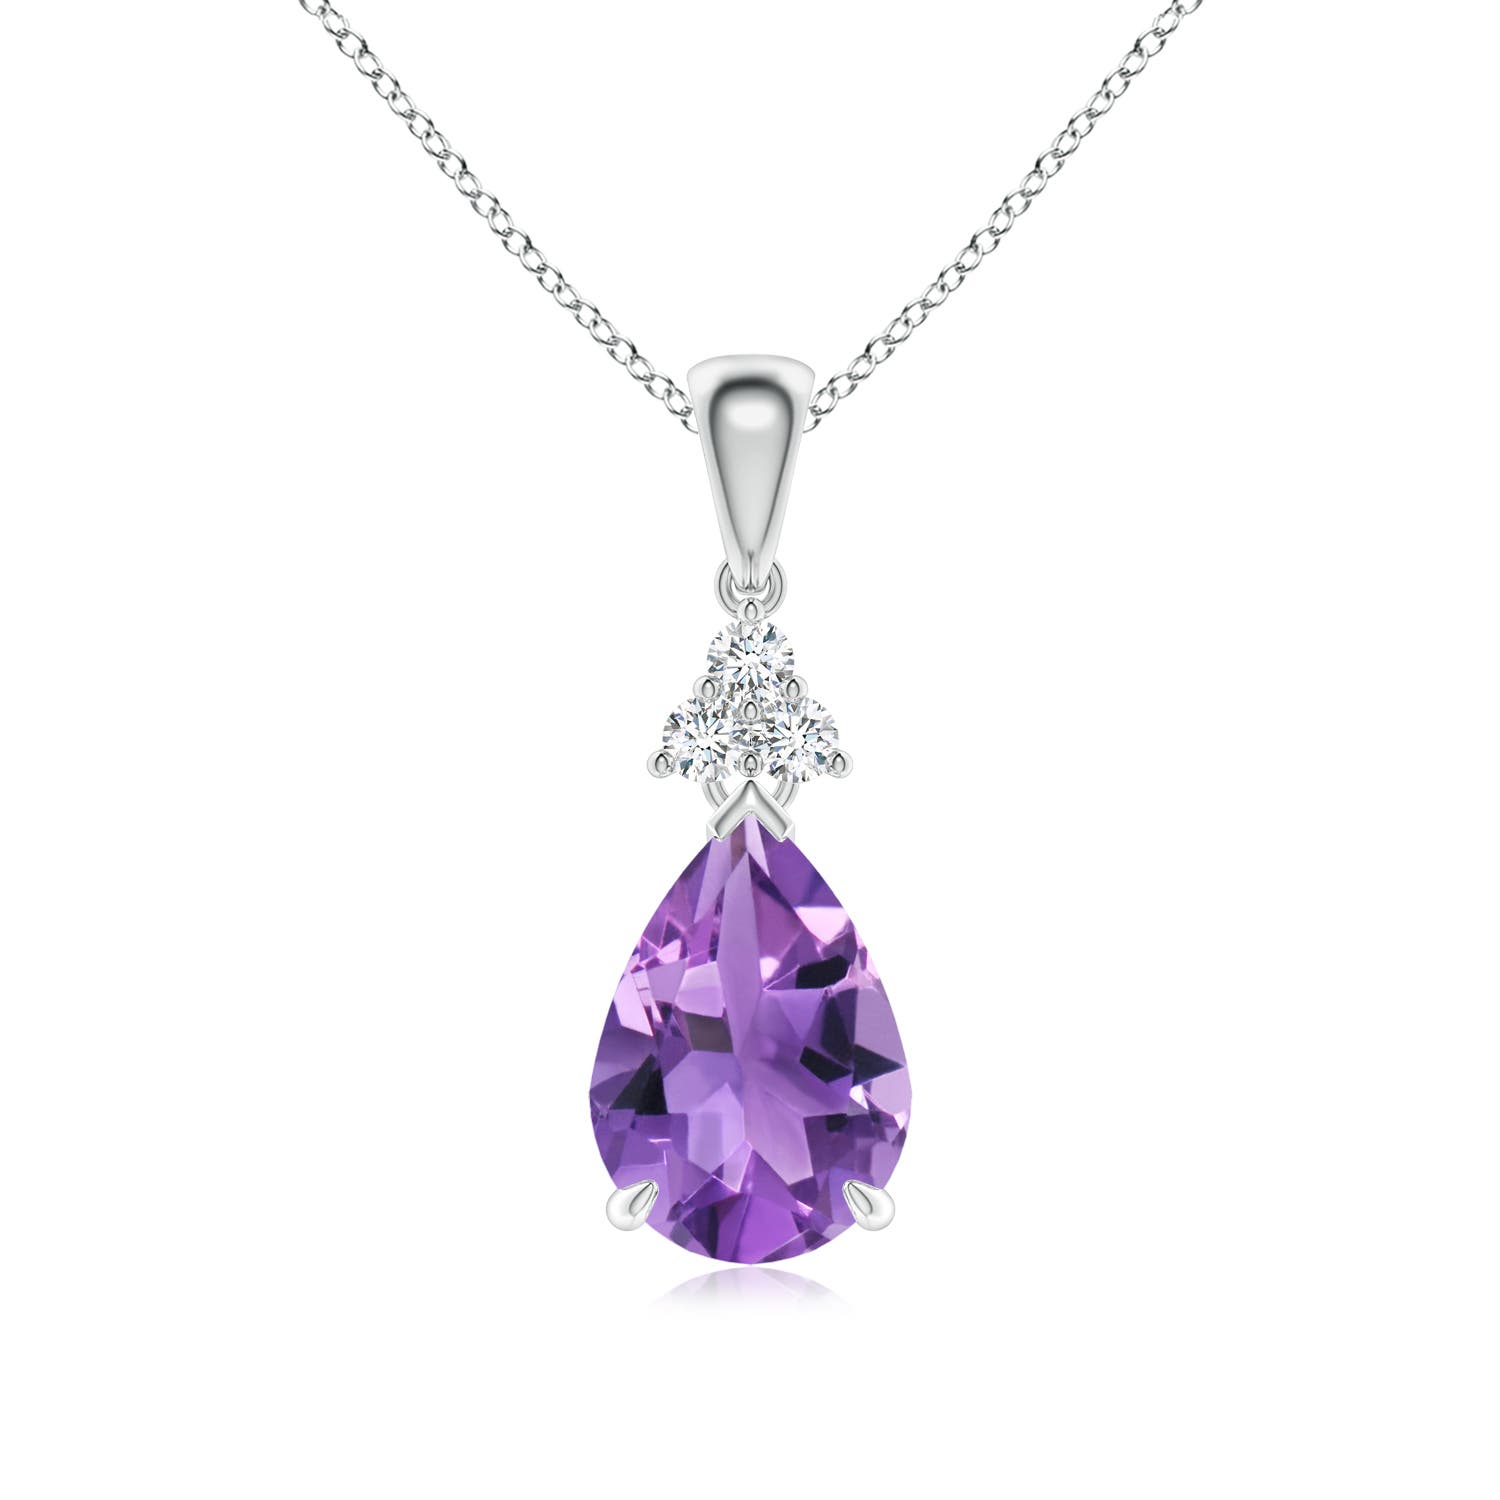 AA - Amethyst / 1.69 CT / 14 KT White Gold